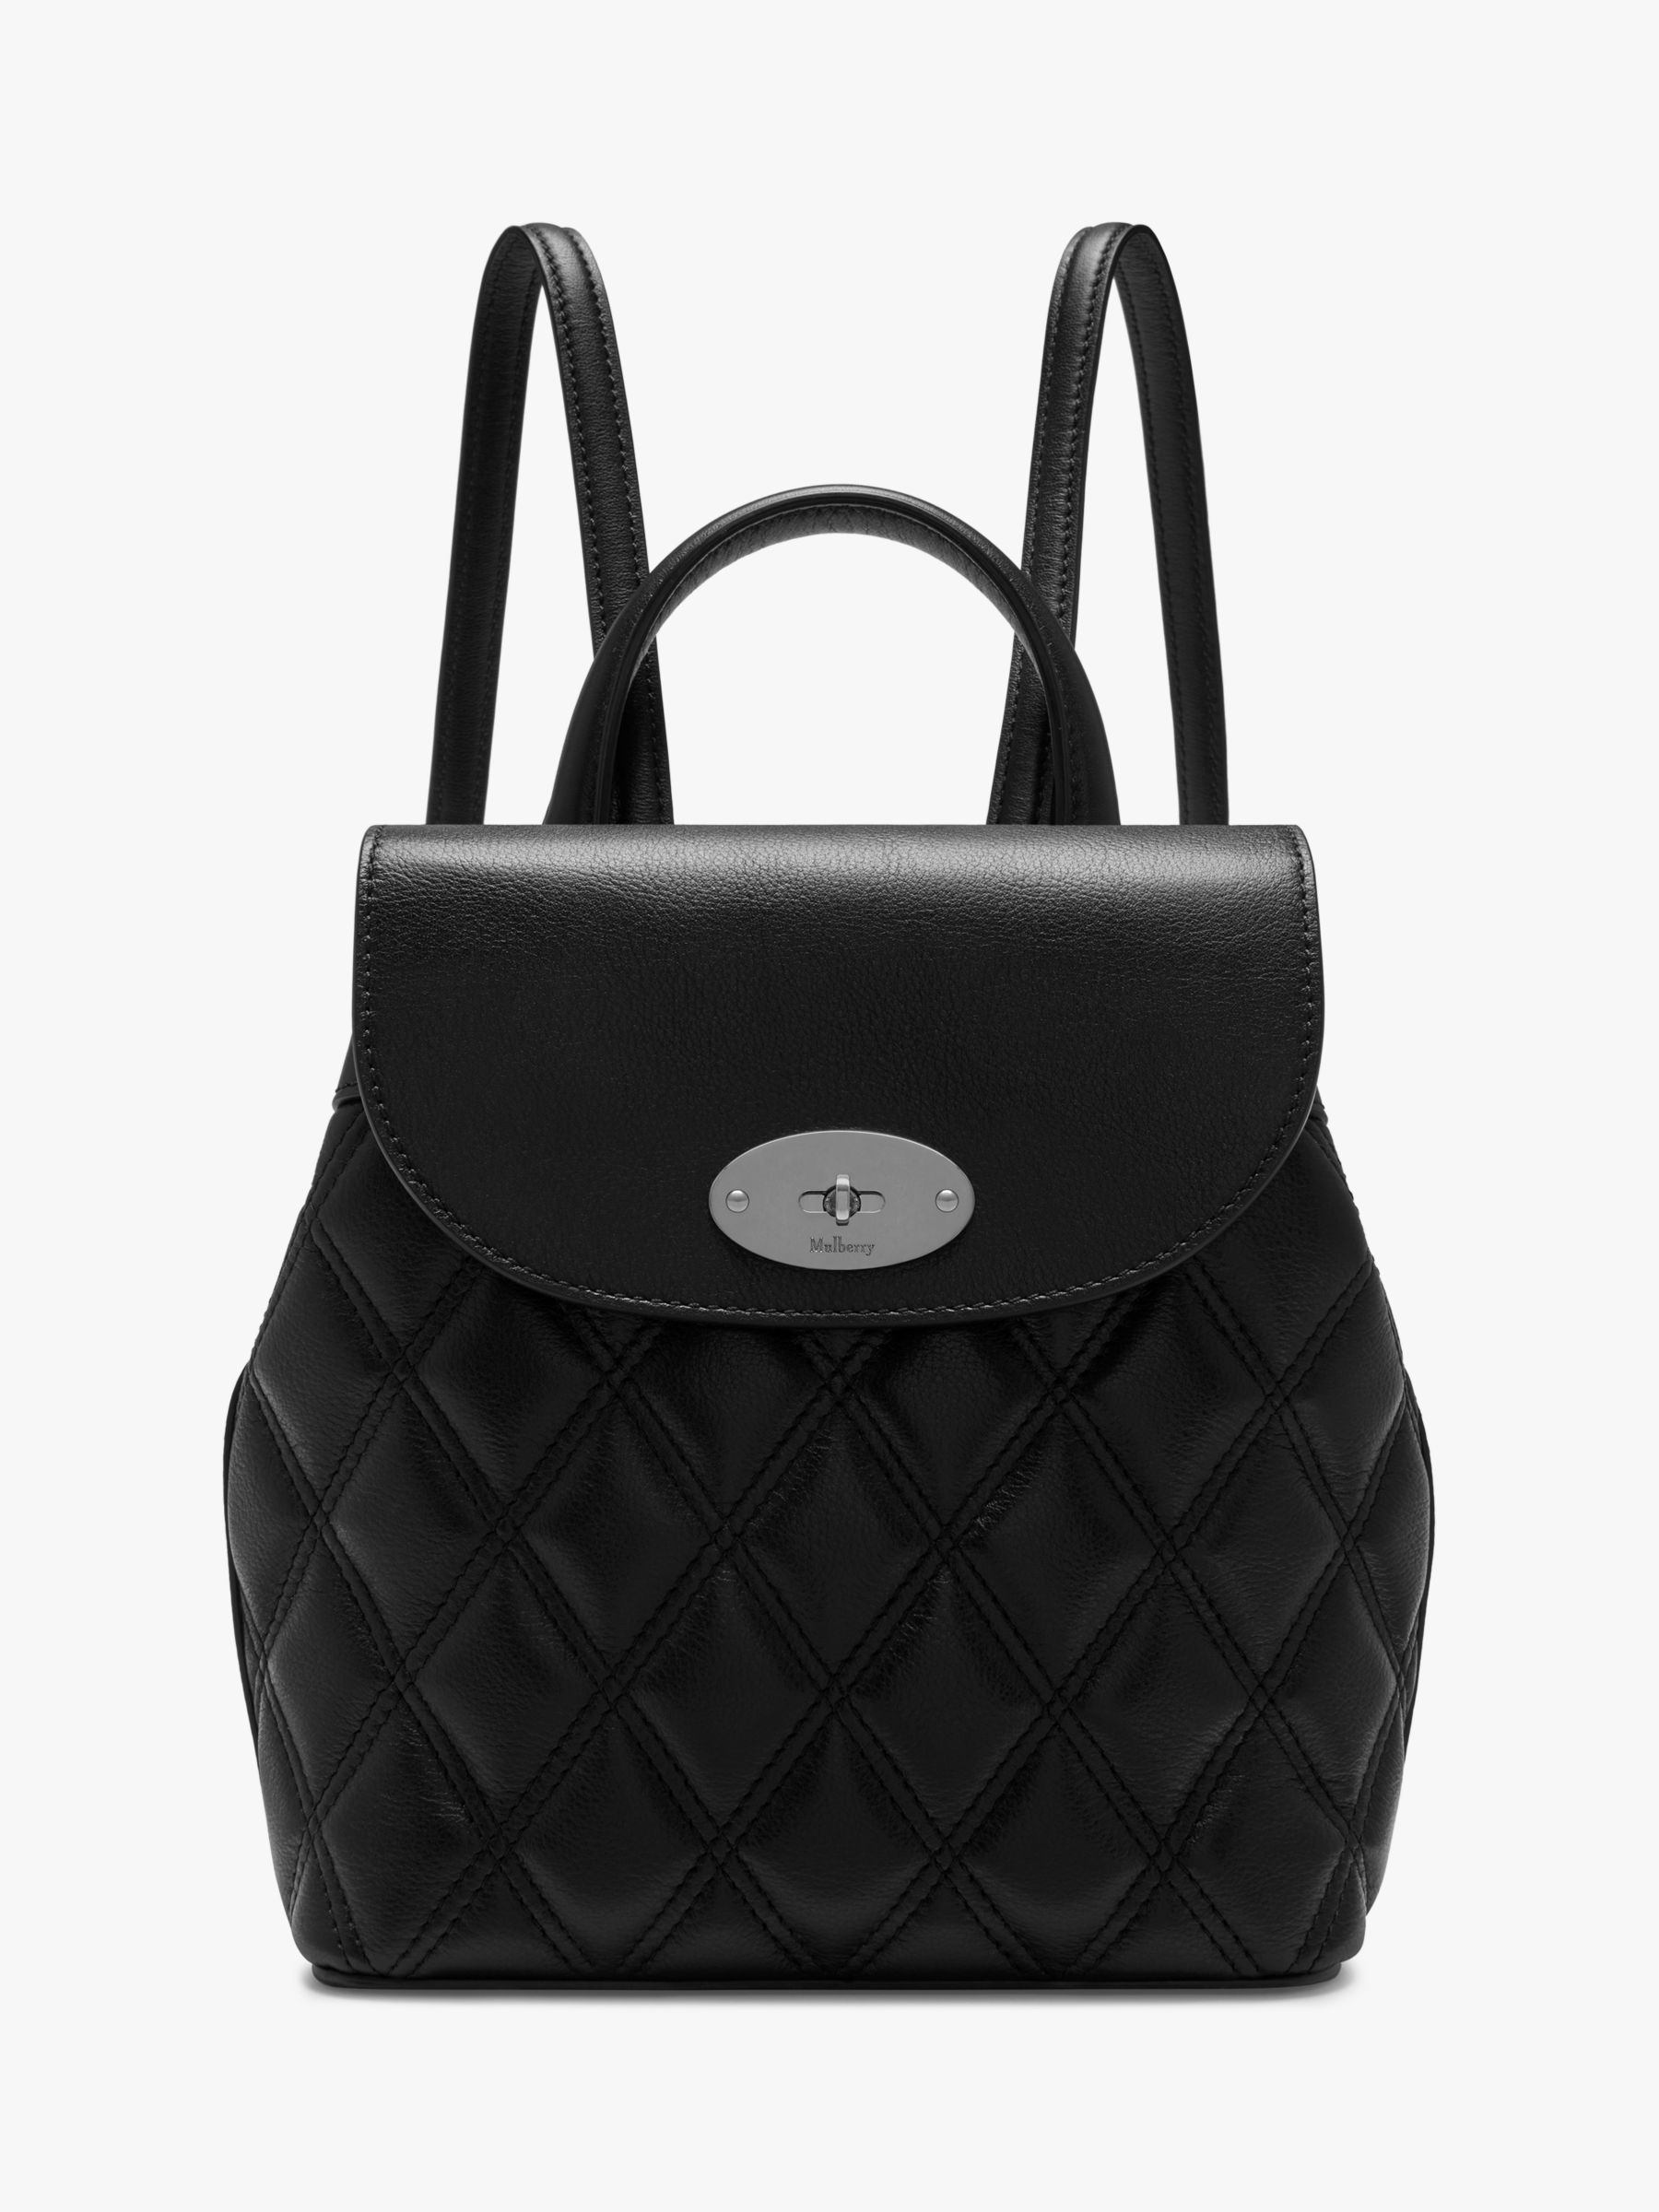 Mulberry Bayswater Backpack (Small, Black)